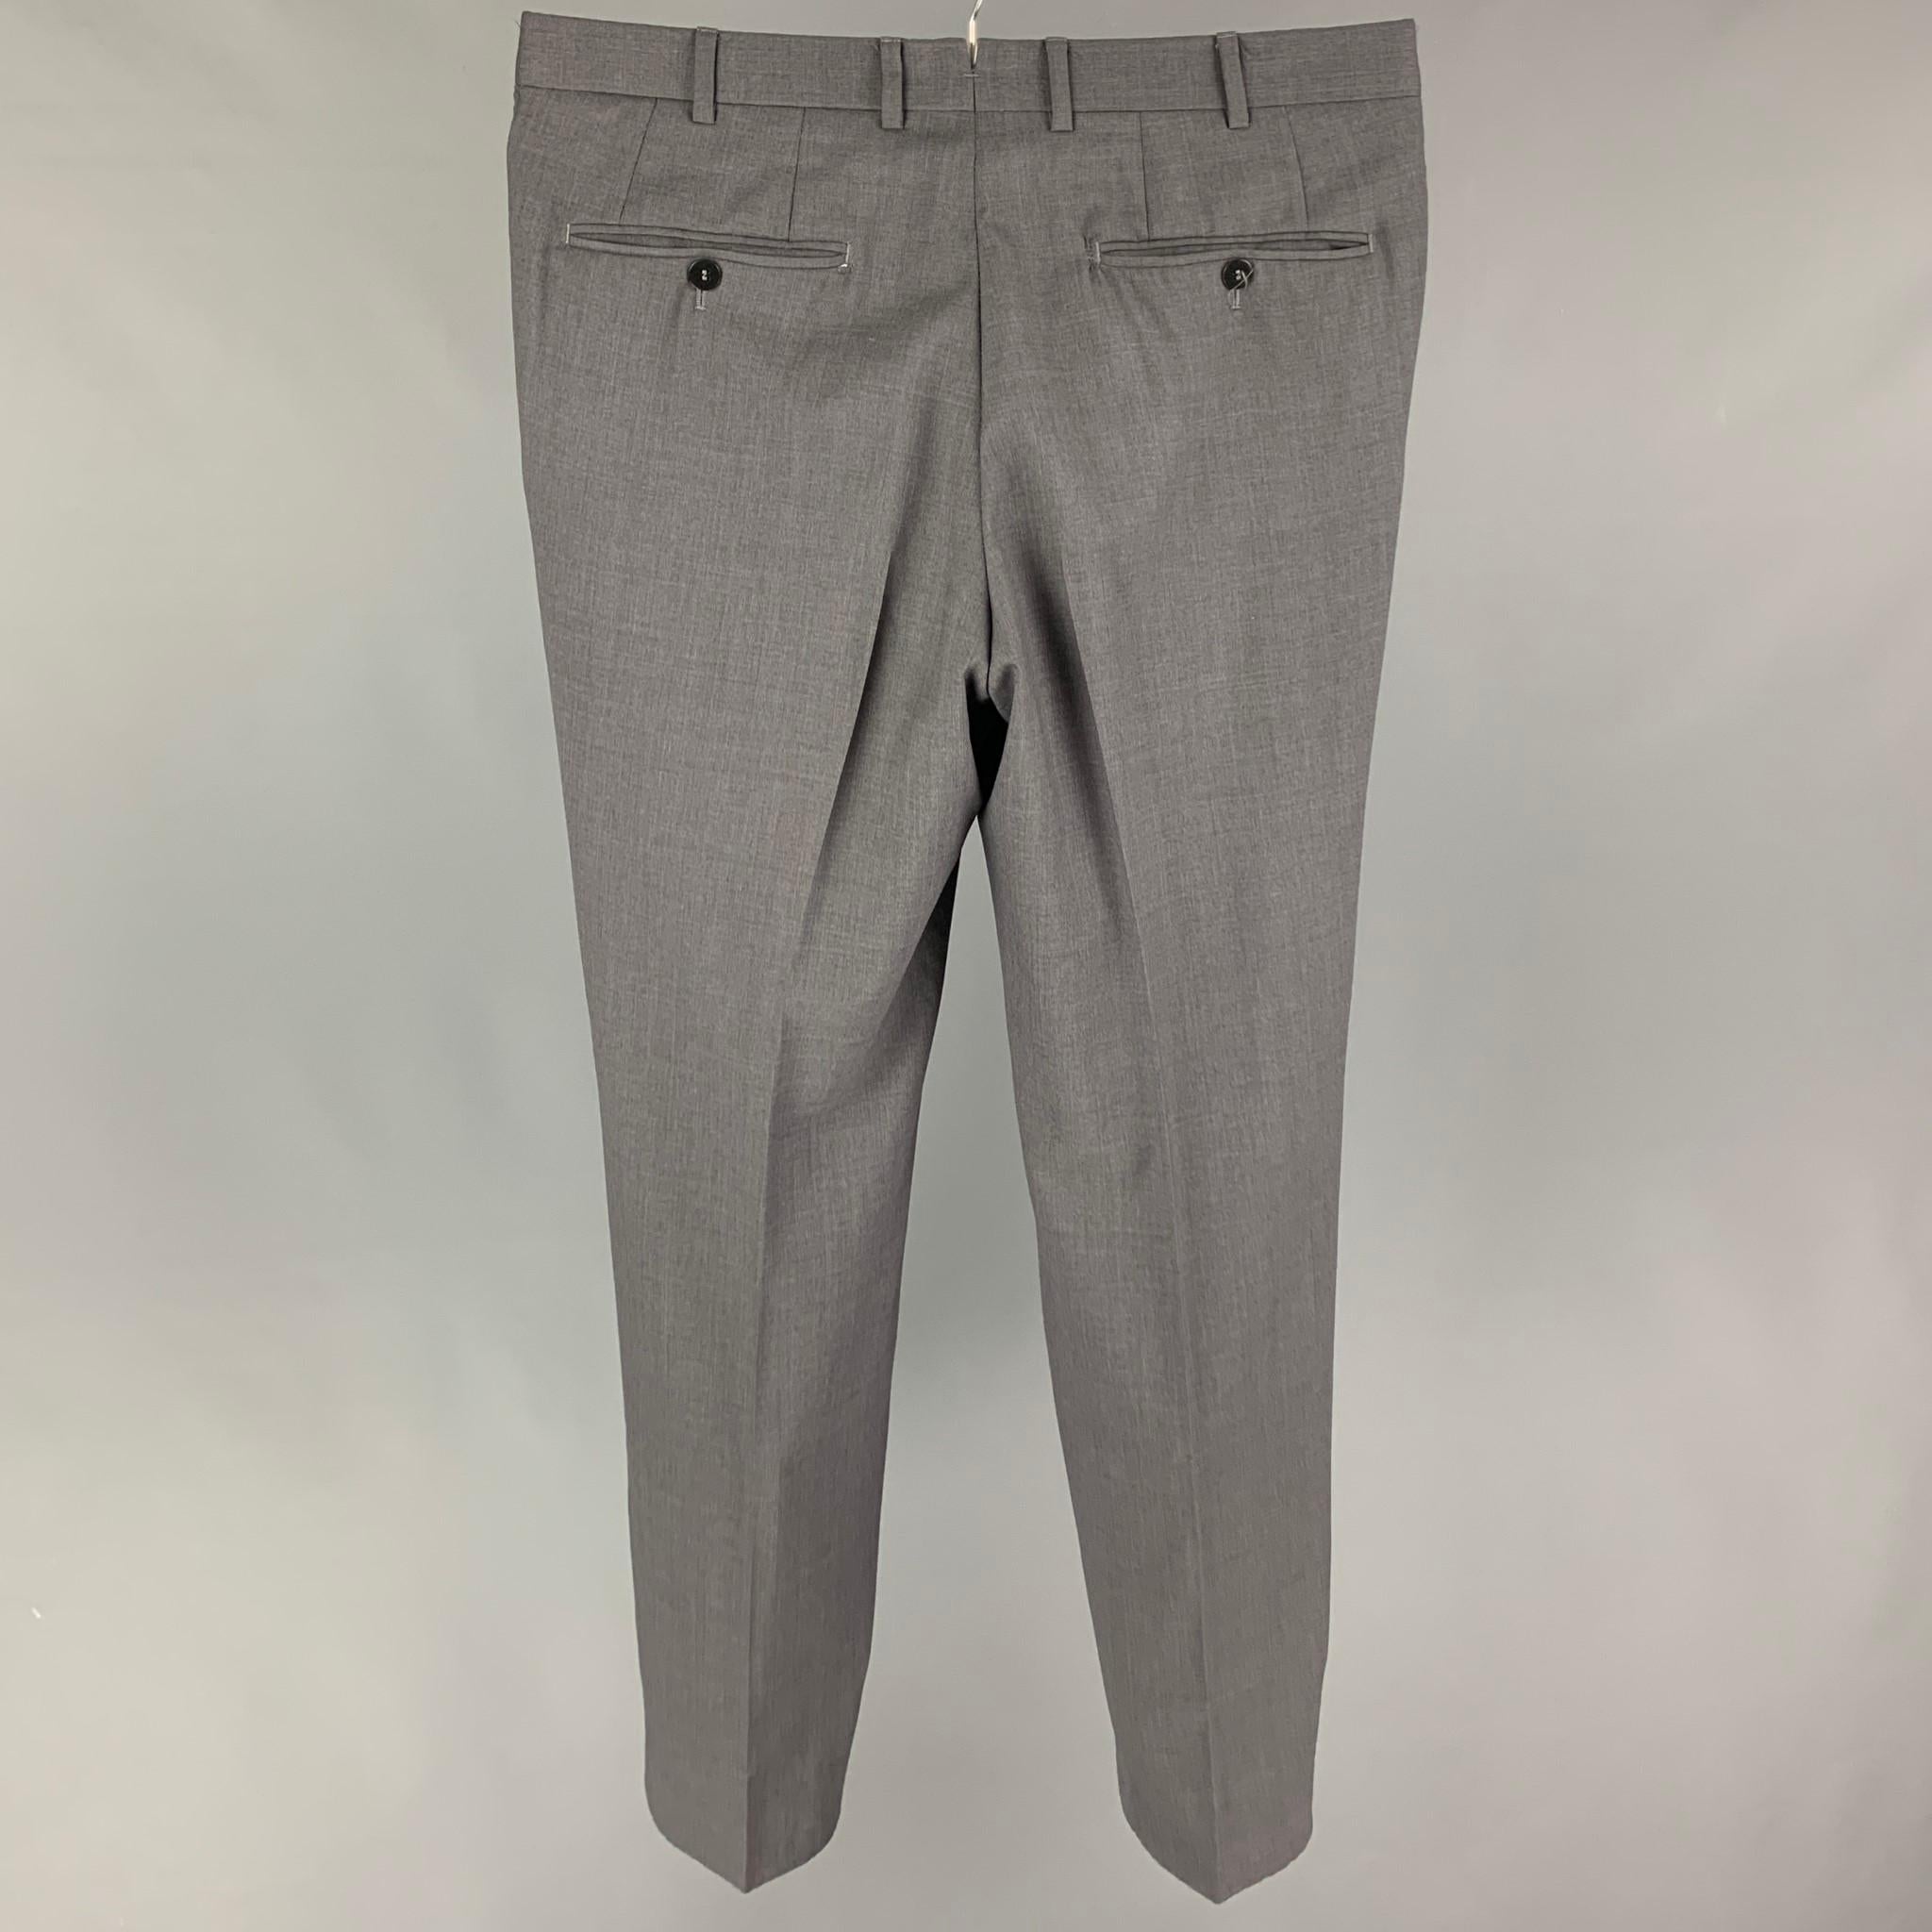 ISAIA dress pants comes in a gray lana wool featuring a flat front and a zip fly closure. Made in Italy. 

Very Good Pre-Owned Condition.
Marked: 48

Measurements:

Waist: 32 in.
Rise: 10 in.
Inseam: 31 in. 